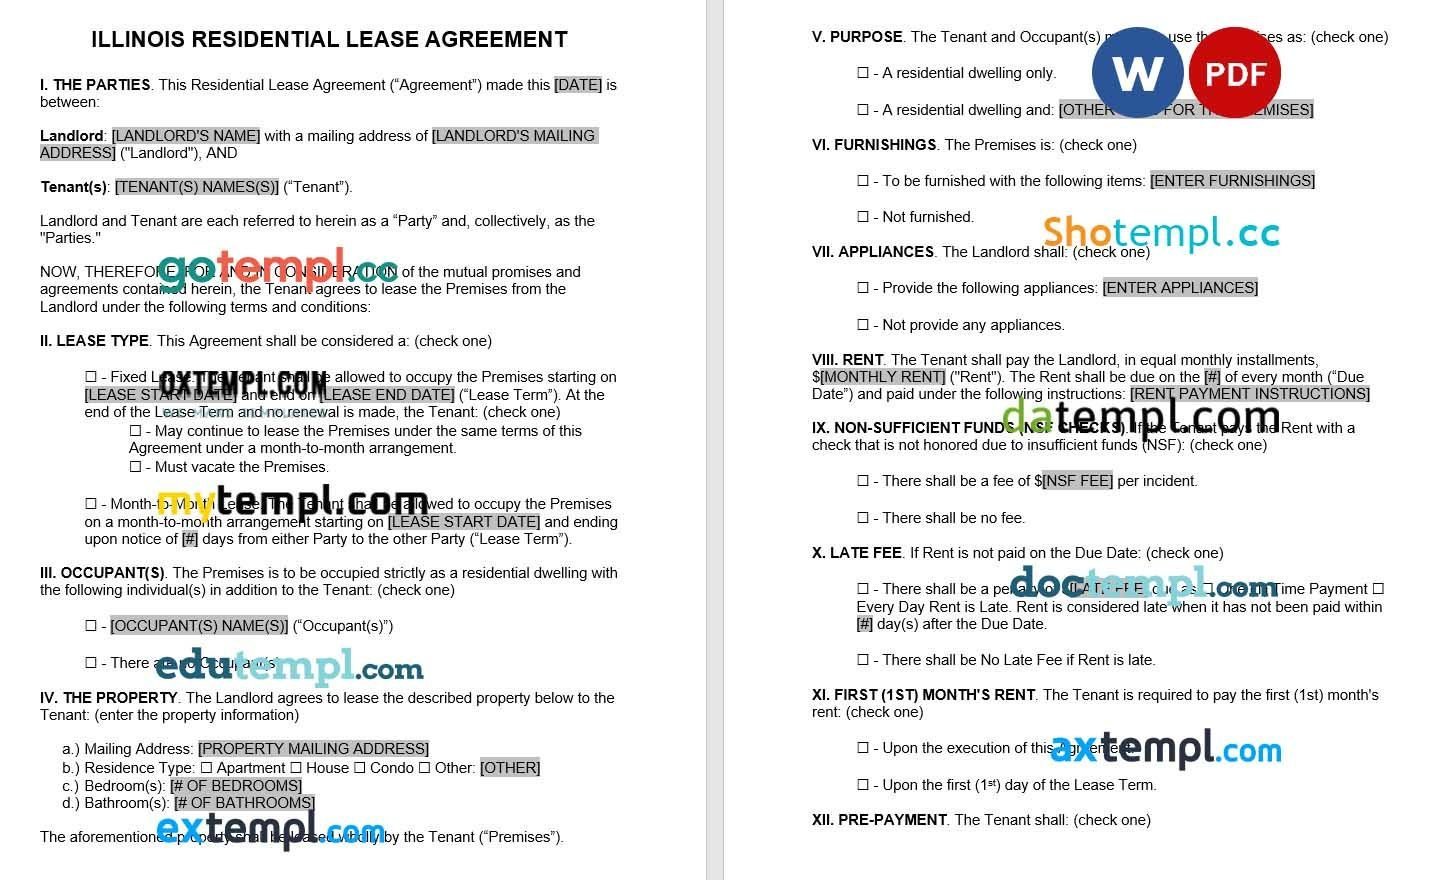 Illinois Standard Residential Lease Agreement Word example, fully editable